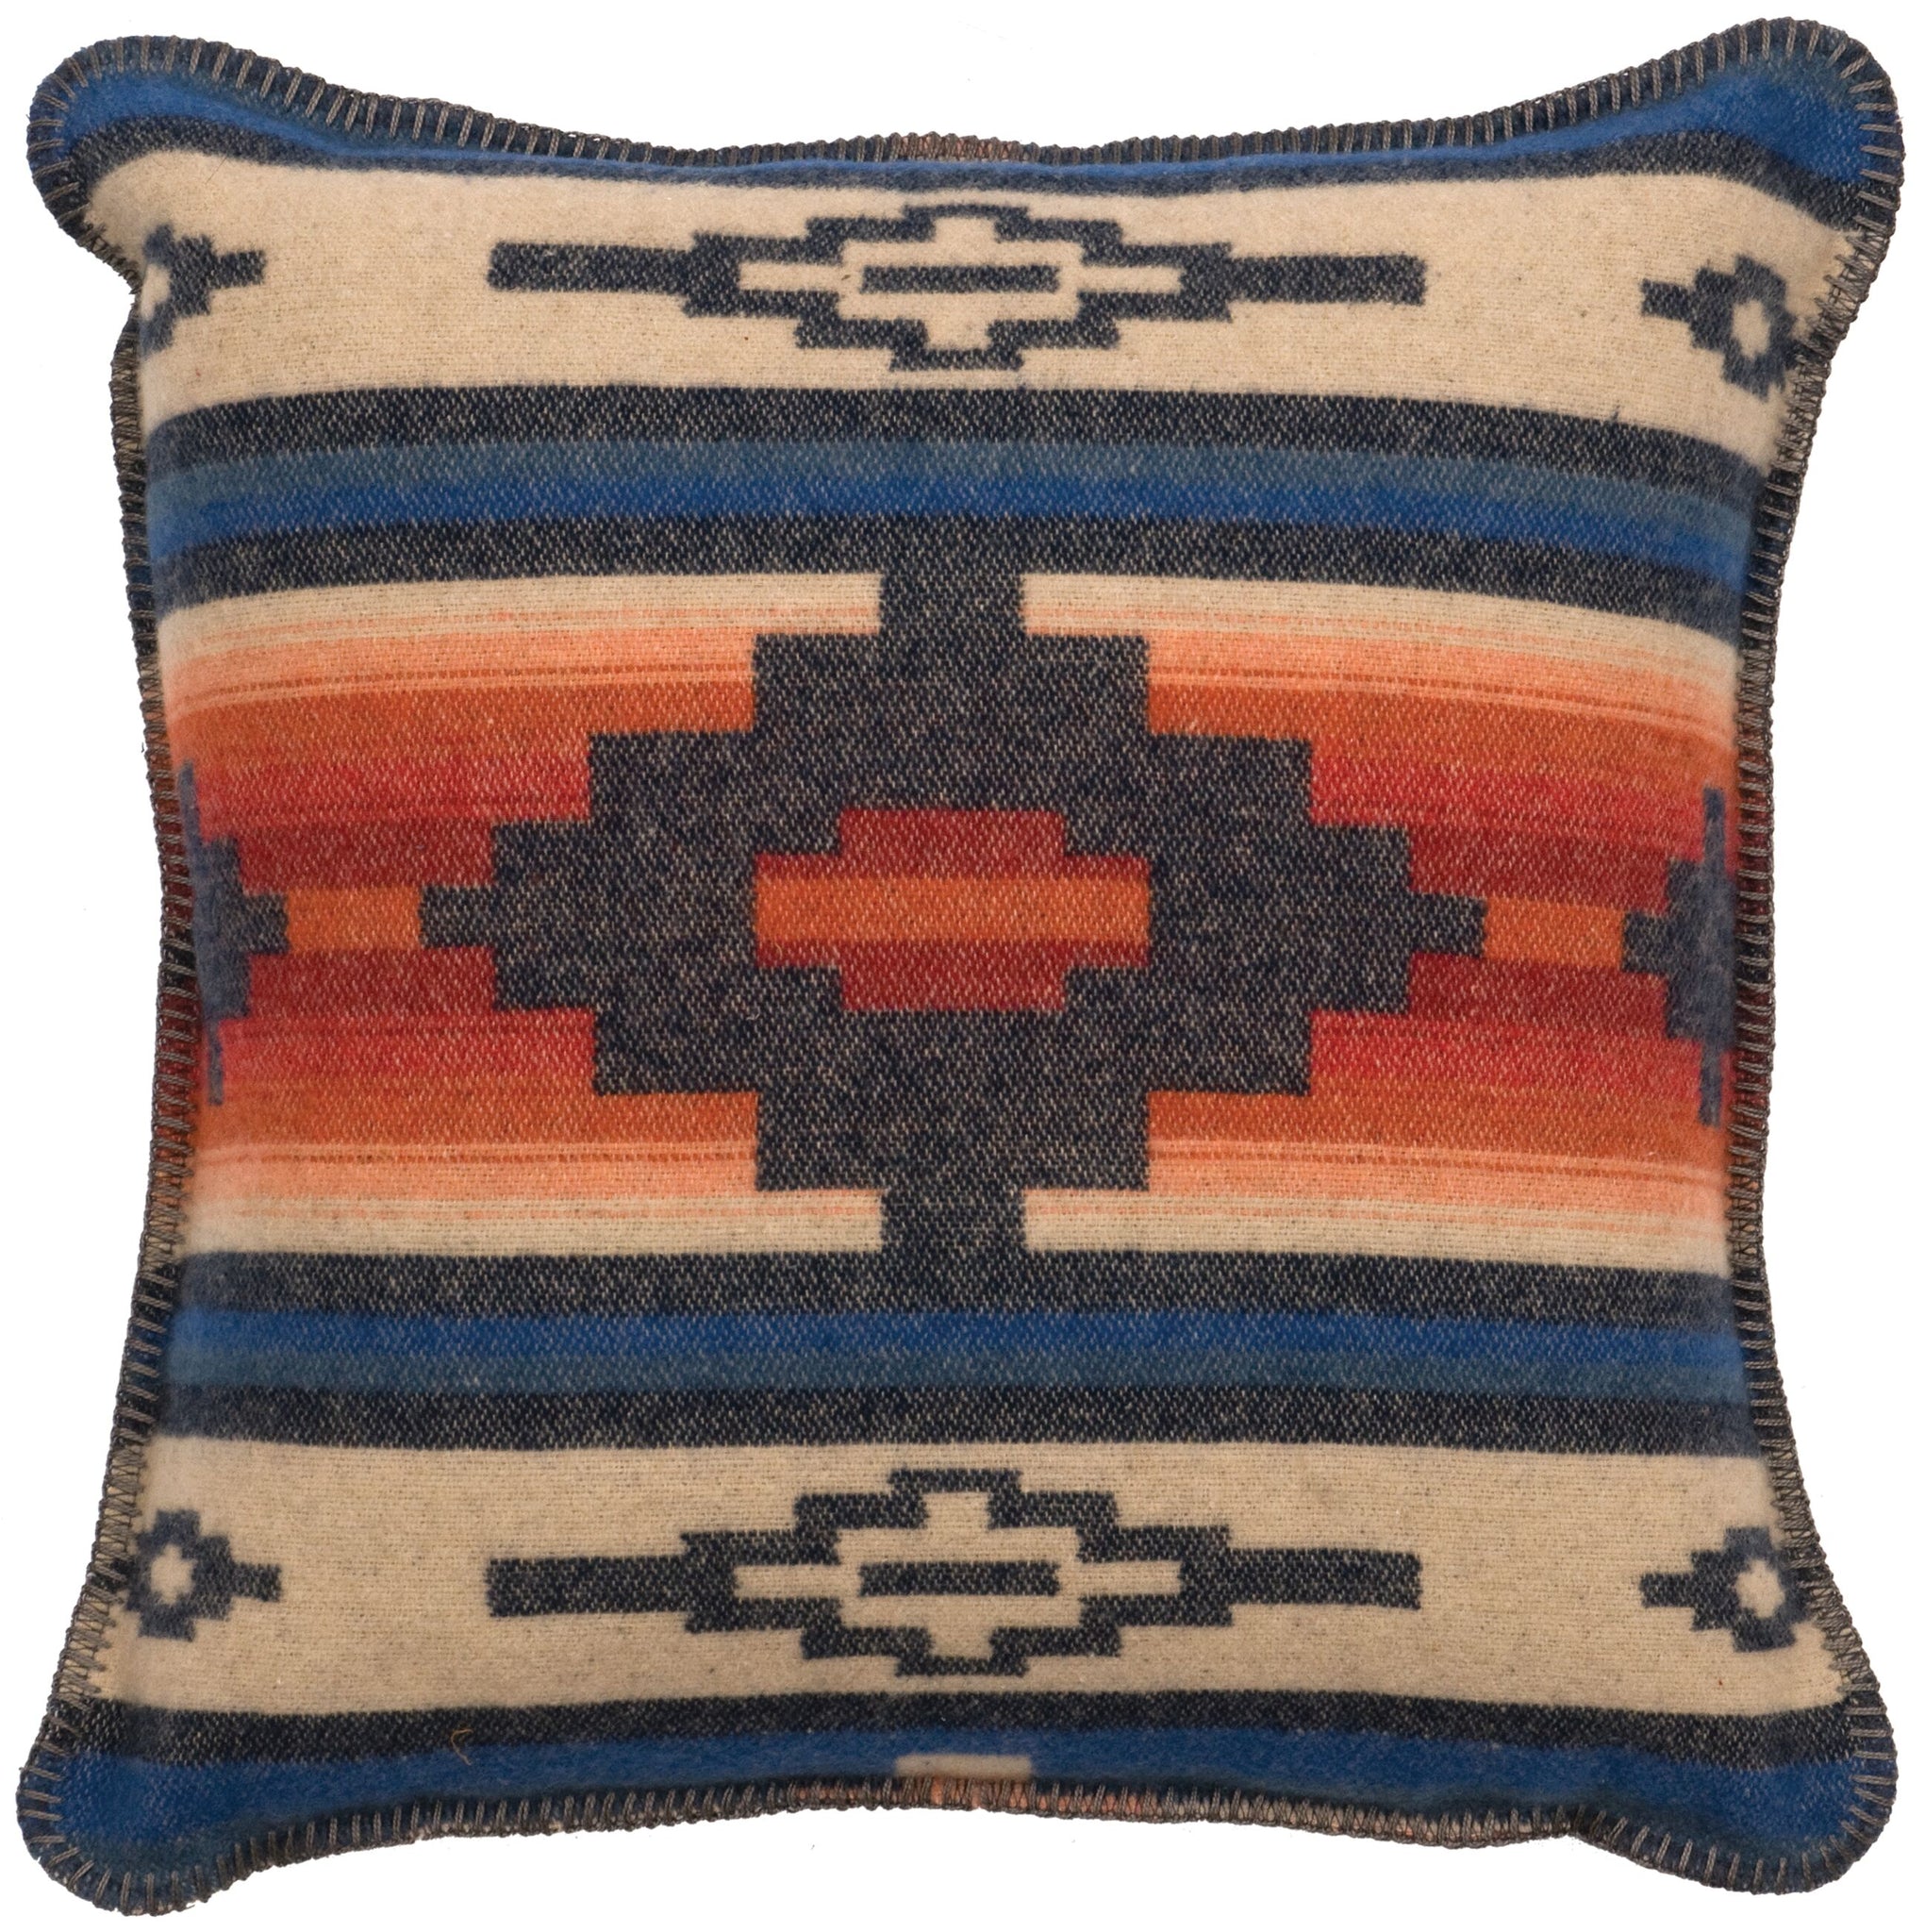 Redrock Canyon Pillow Wooded River - Unique Linens Online